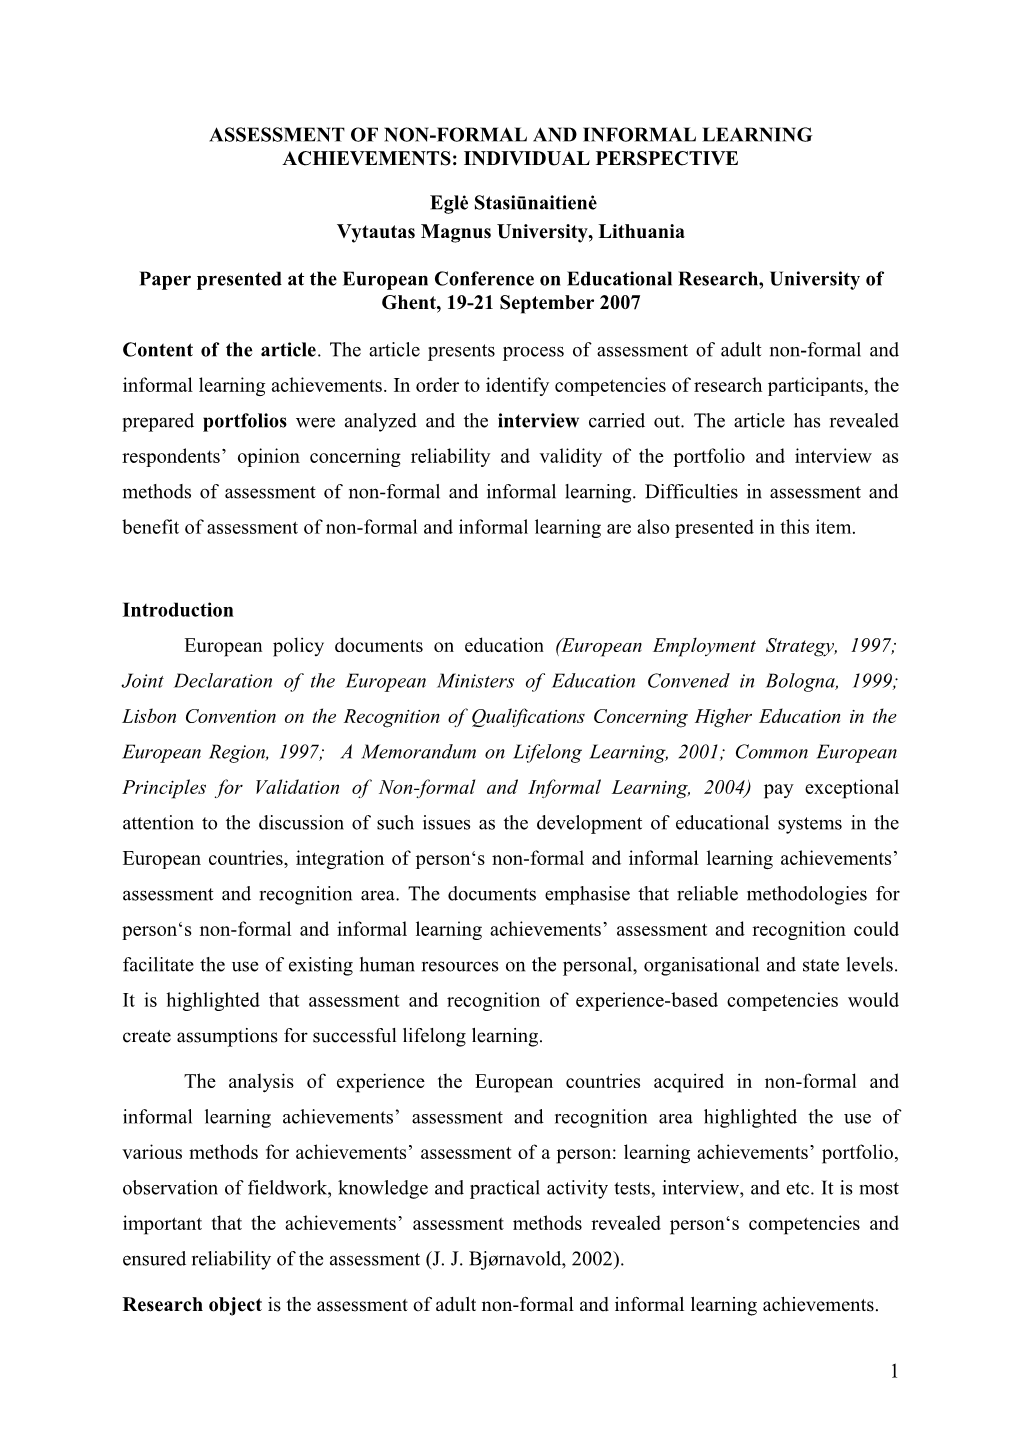 Assessment of Non-Formal and Informal Learning Achievements: Individual Perspective